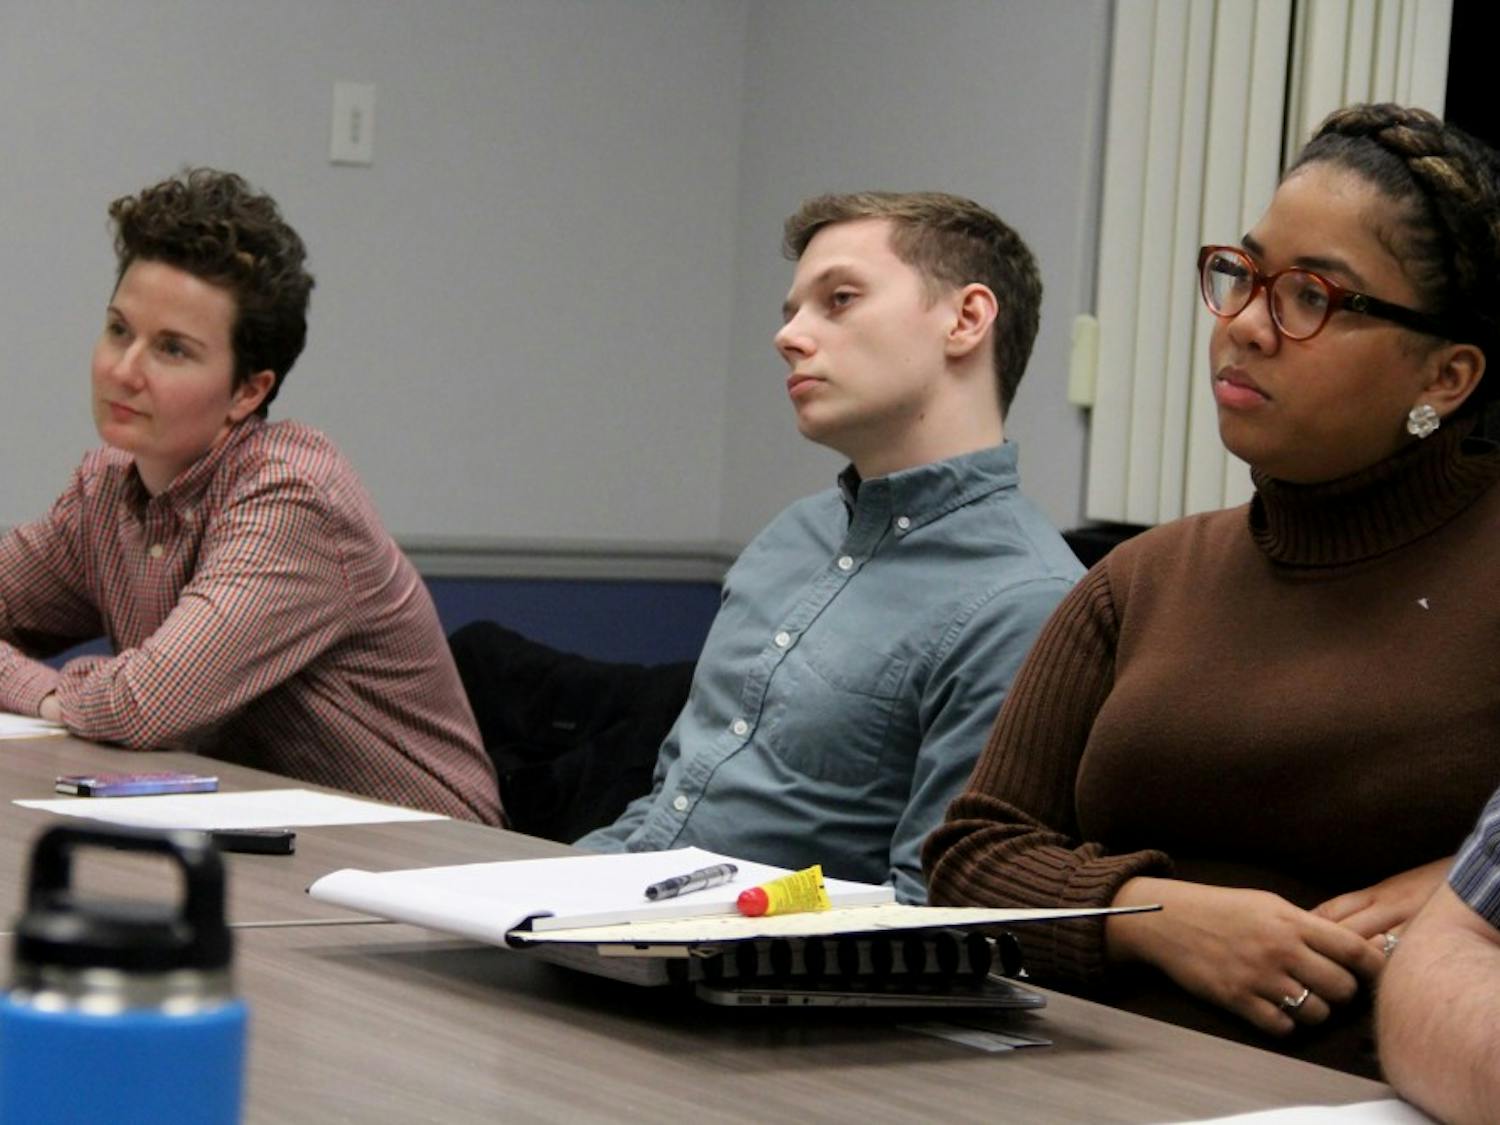 UB Council of Advocacy and Leadership meeting held last Wednesday. Graduate Student Association President Tanja Aho (left), Student Wide Judiciary Chief Justice Joe Wolf (center) and Undergraduate Student Association President Leslie Veloz (right) sitting in at a meeting.